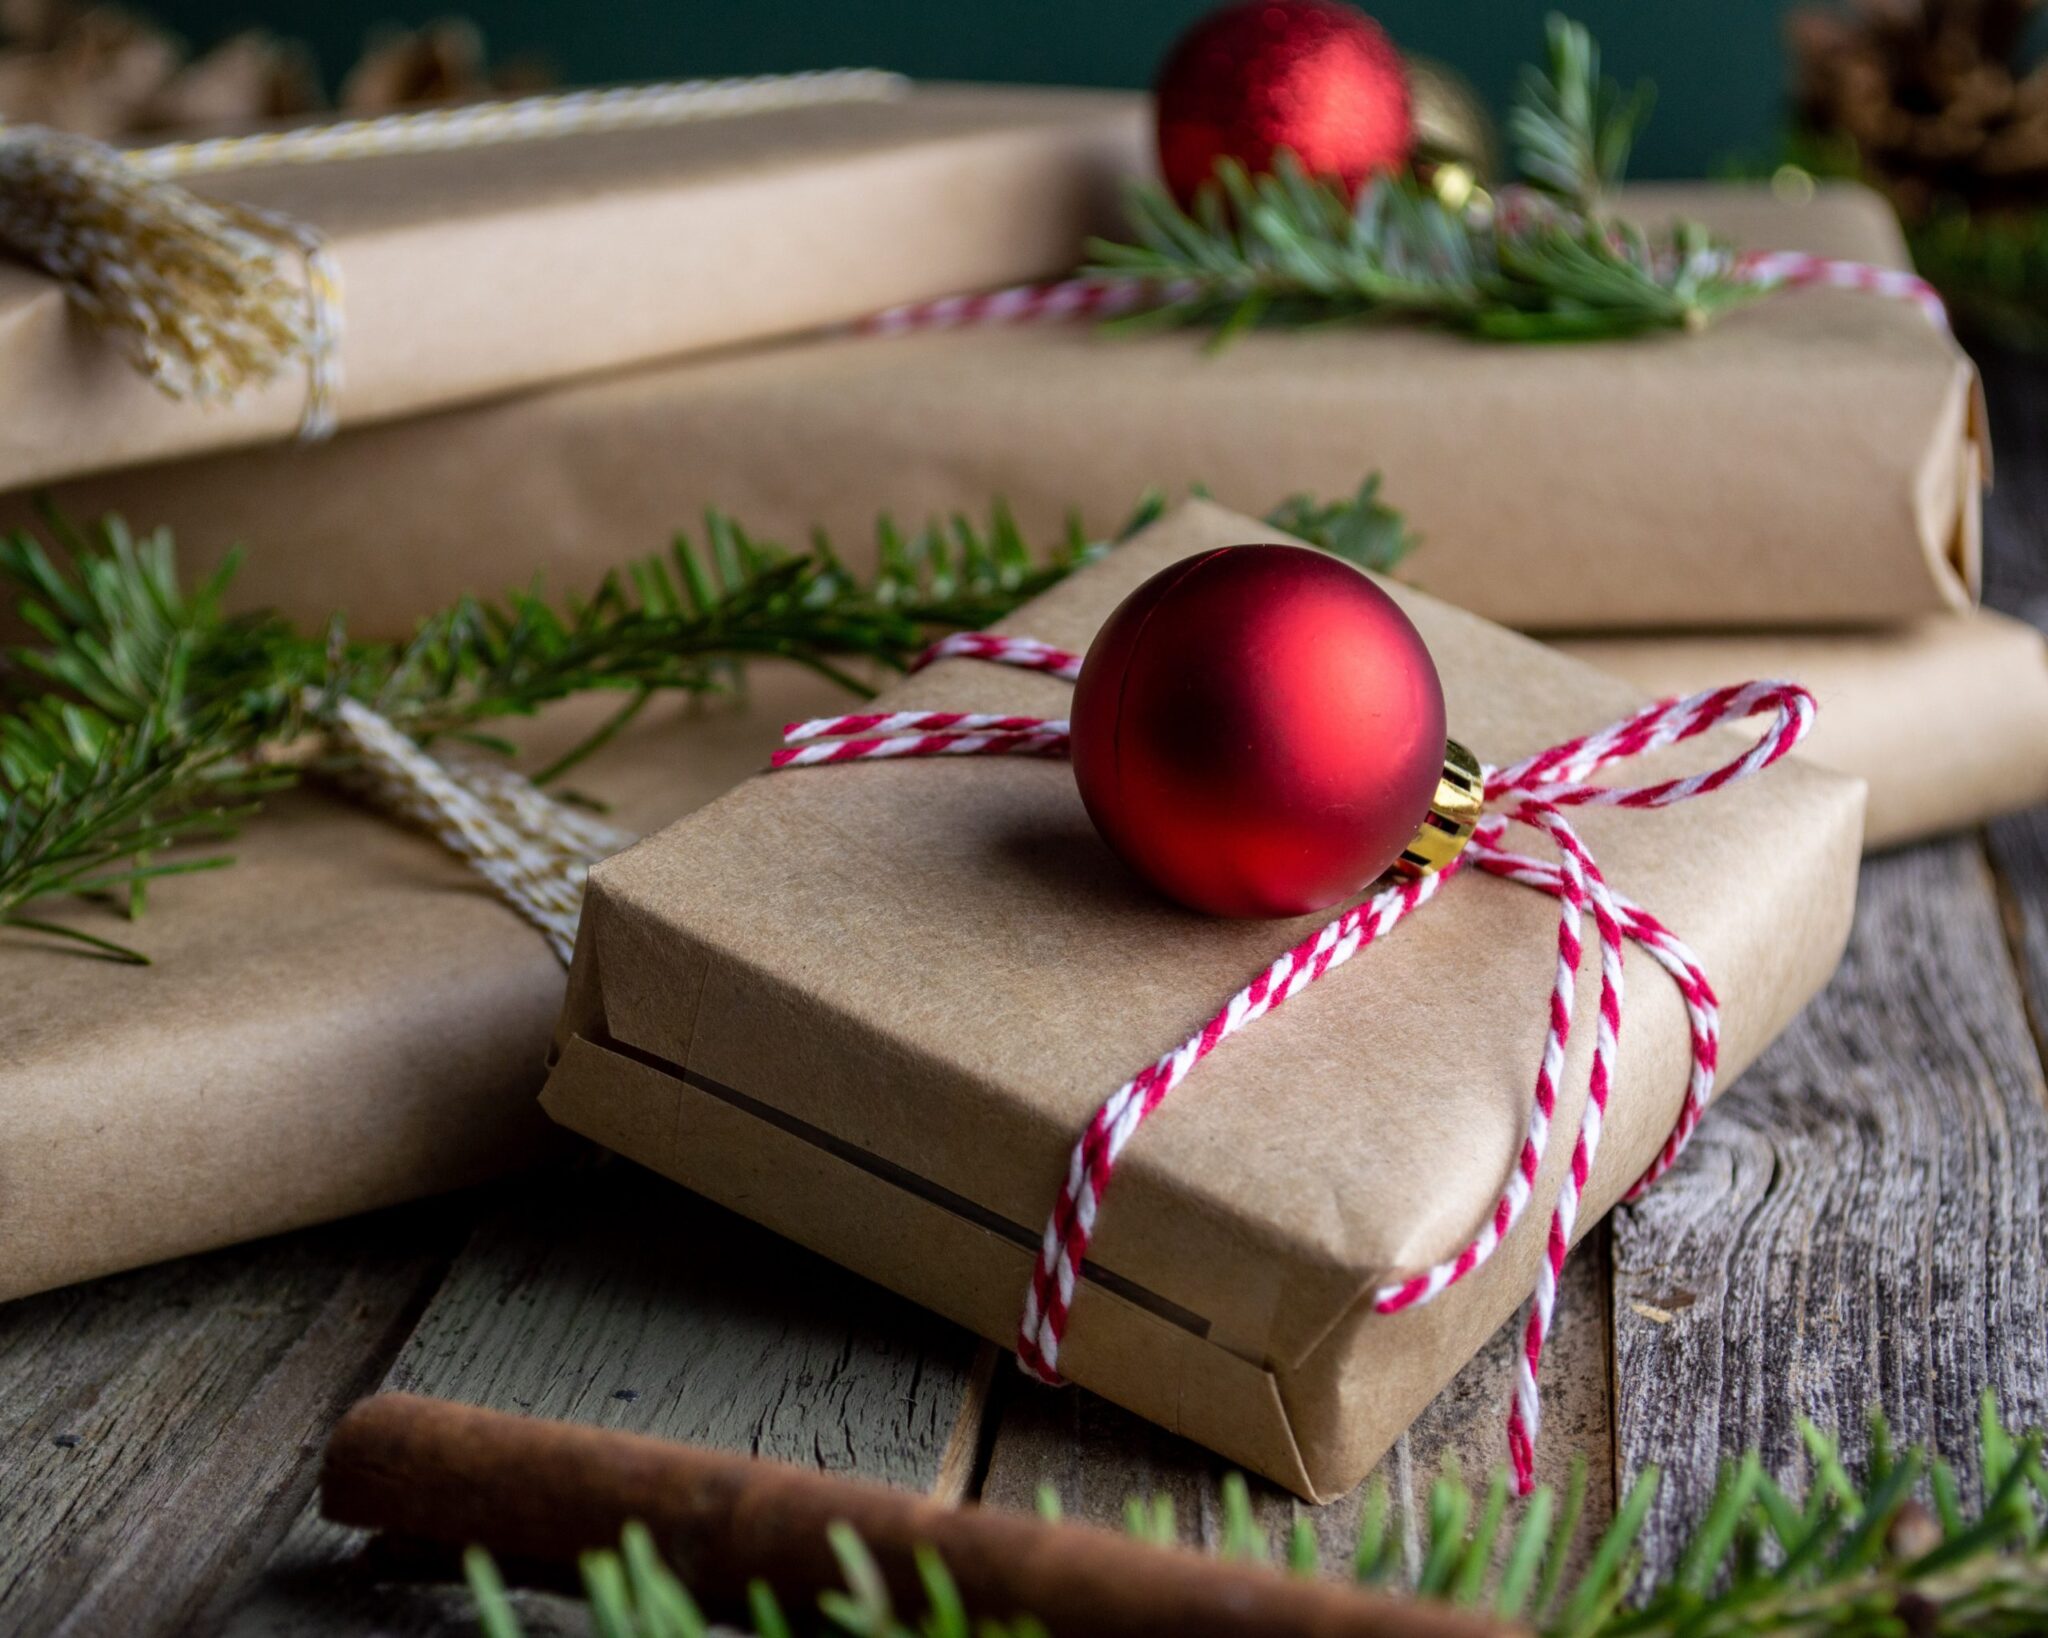 presents wrapped in brown paper with red string and a bauble decoration